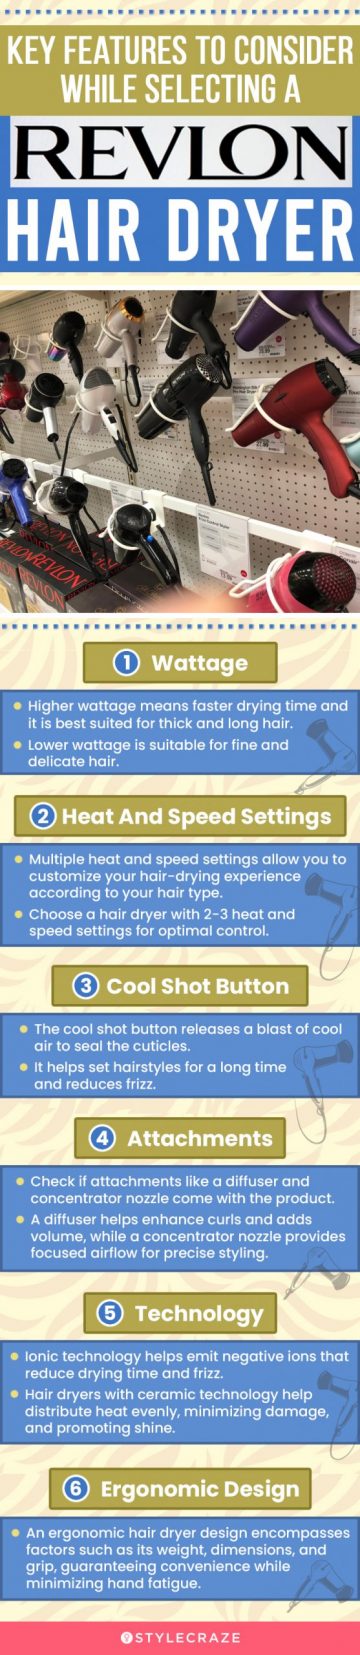 Key Features To Consider While Selecting A Revlon Hair Dryer (infographic)